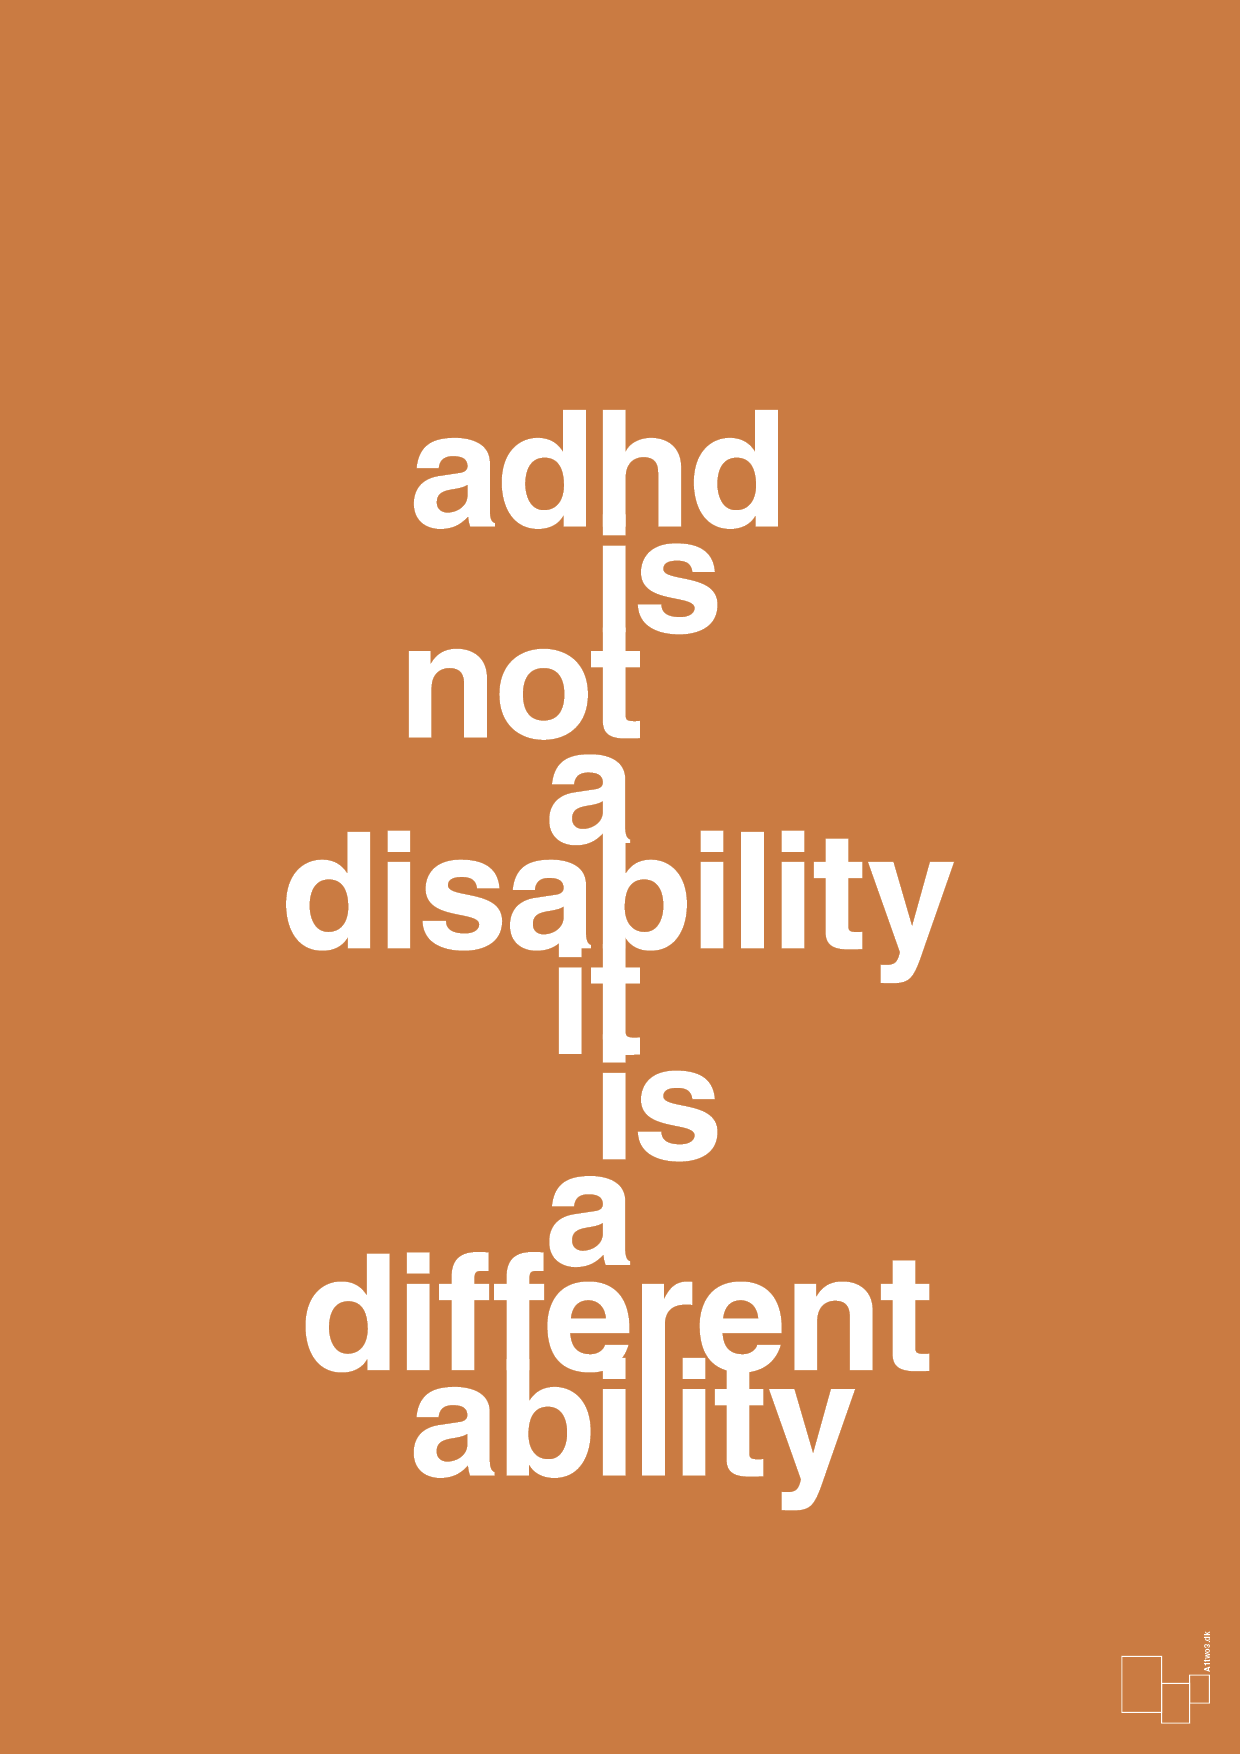 adhd is not a disability it is a different ability - Plakat med Samfund i Rumba Orange